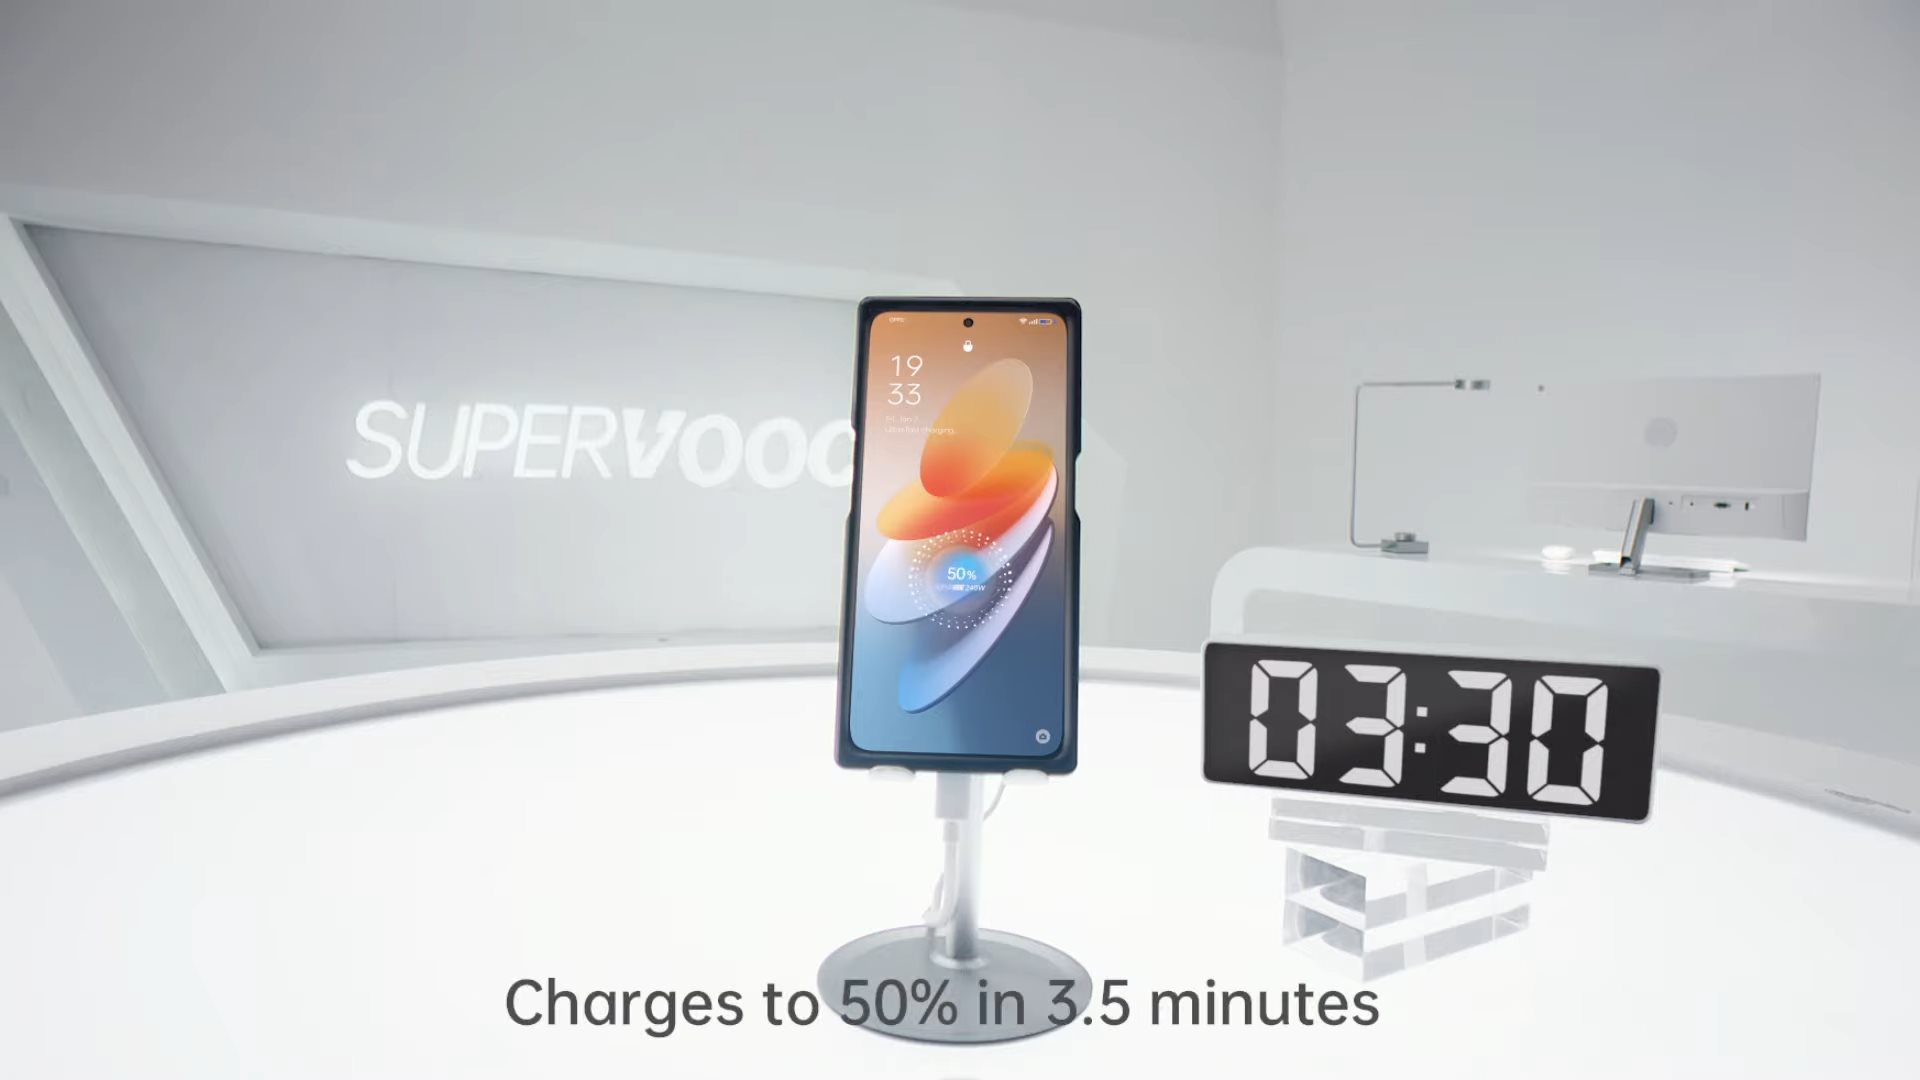 9 minutes to charge a smartphone using the Oppo SuperVooc 240 W

